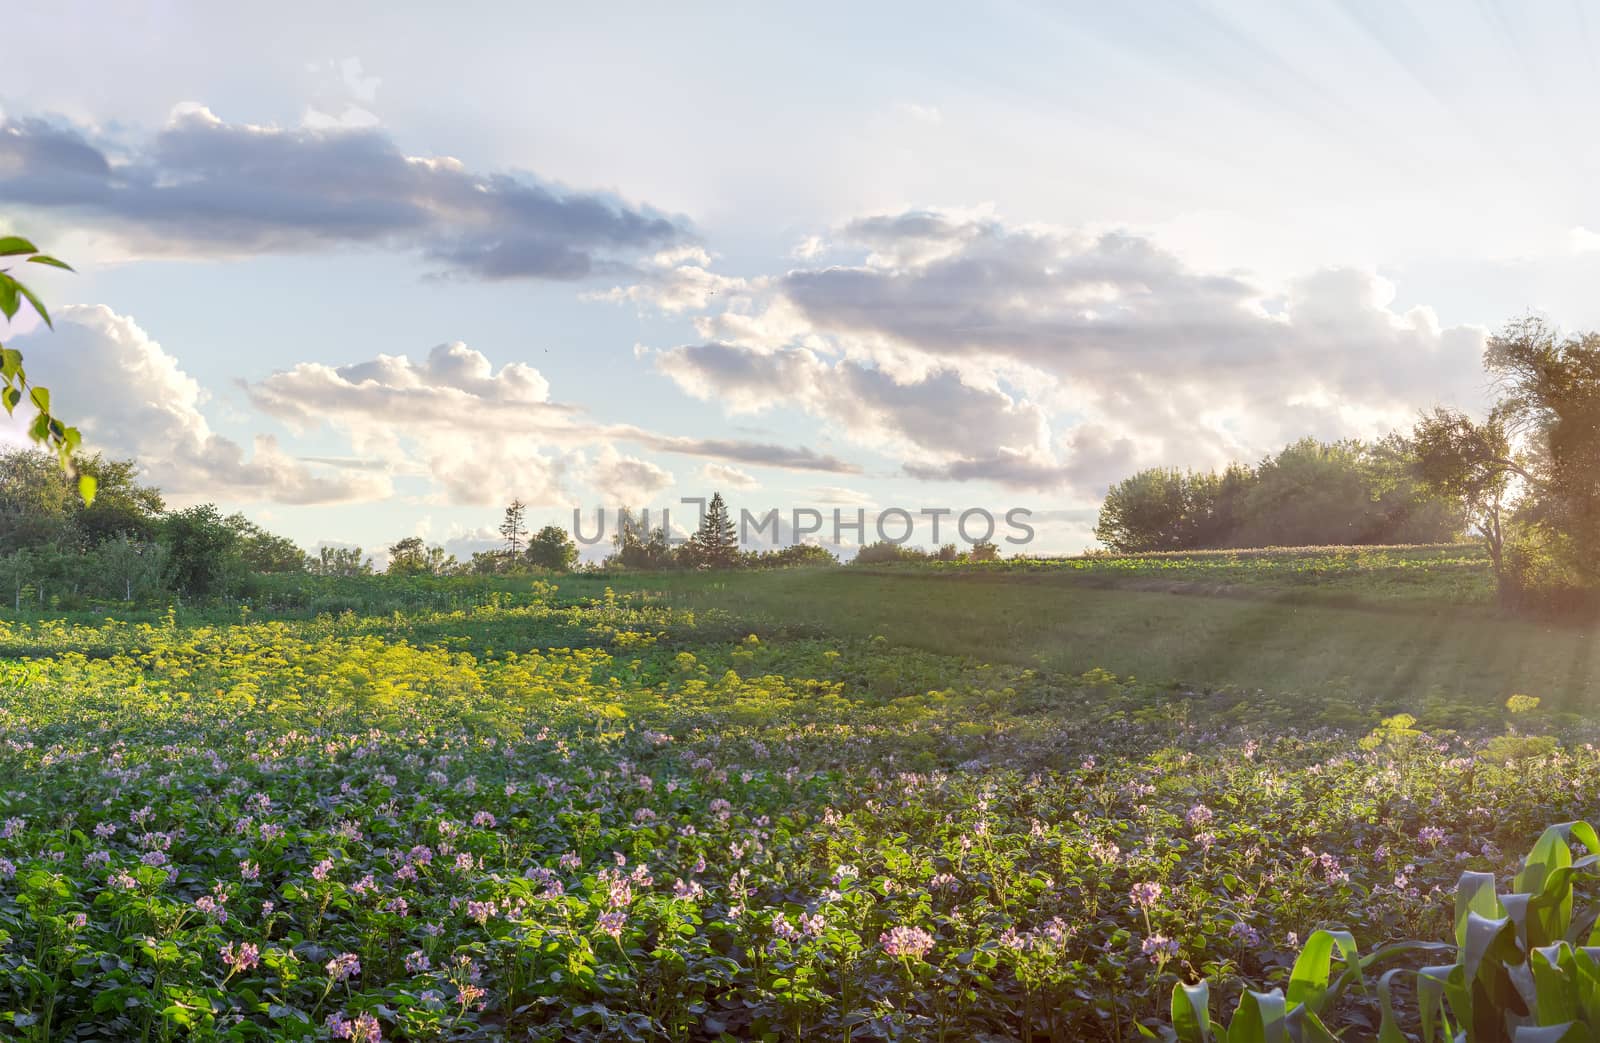 Field with plantation of the flowering potatoes in the foreground against trees and sky with clouds at sunset
